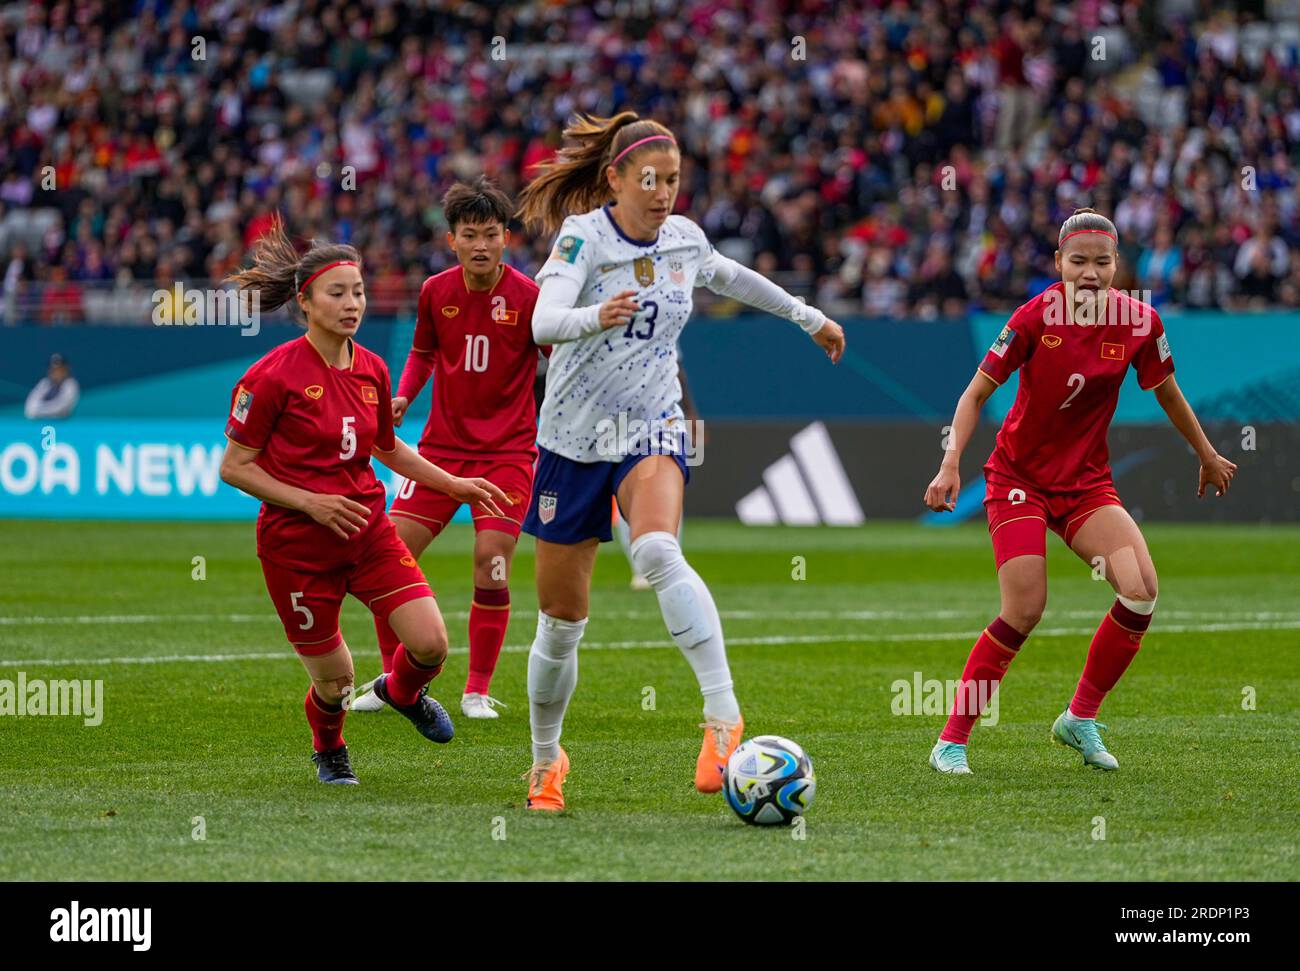 Eden Park, Auckland, New Zealand. 22nd July, 2023. Alex Morgan (USA) controls the ball during a Group E - FIFA Women's World Cup Australia & New Zealand 2023 game, USA vs Vietnam, at Eden Park, Auckland, New Zealand. Kim Price/CSM/Alamy Live News Stock Photo